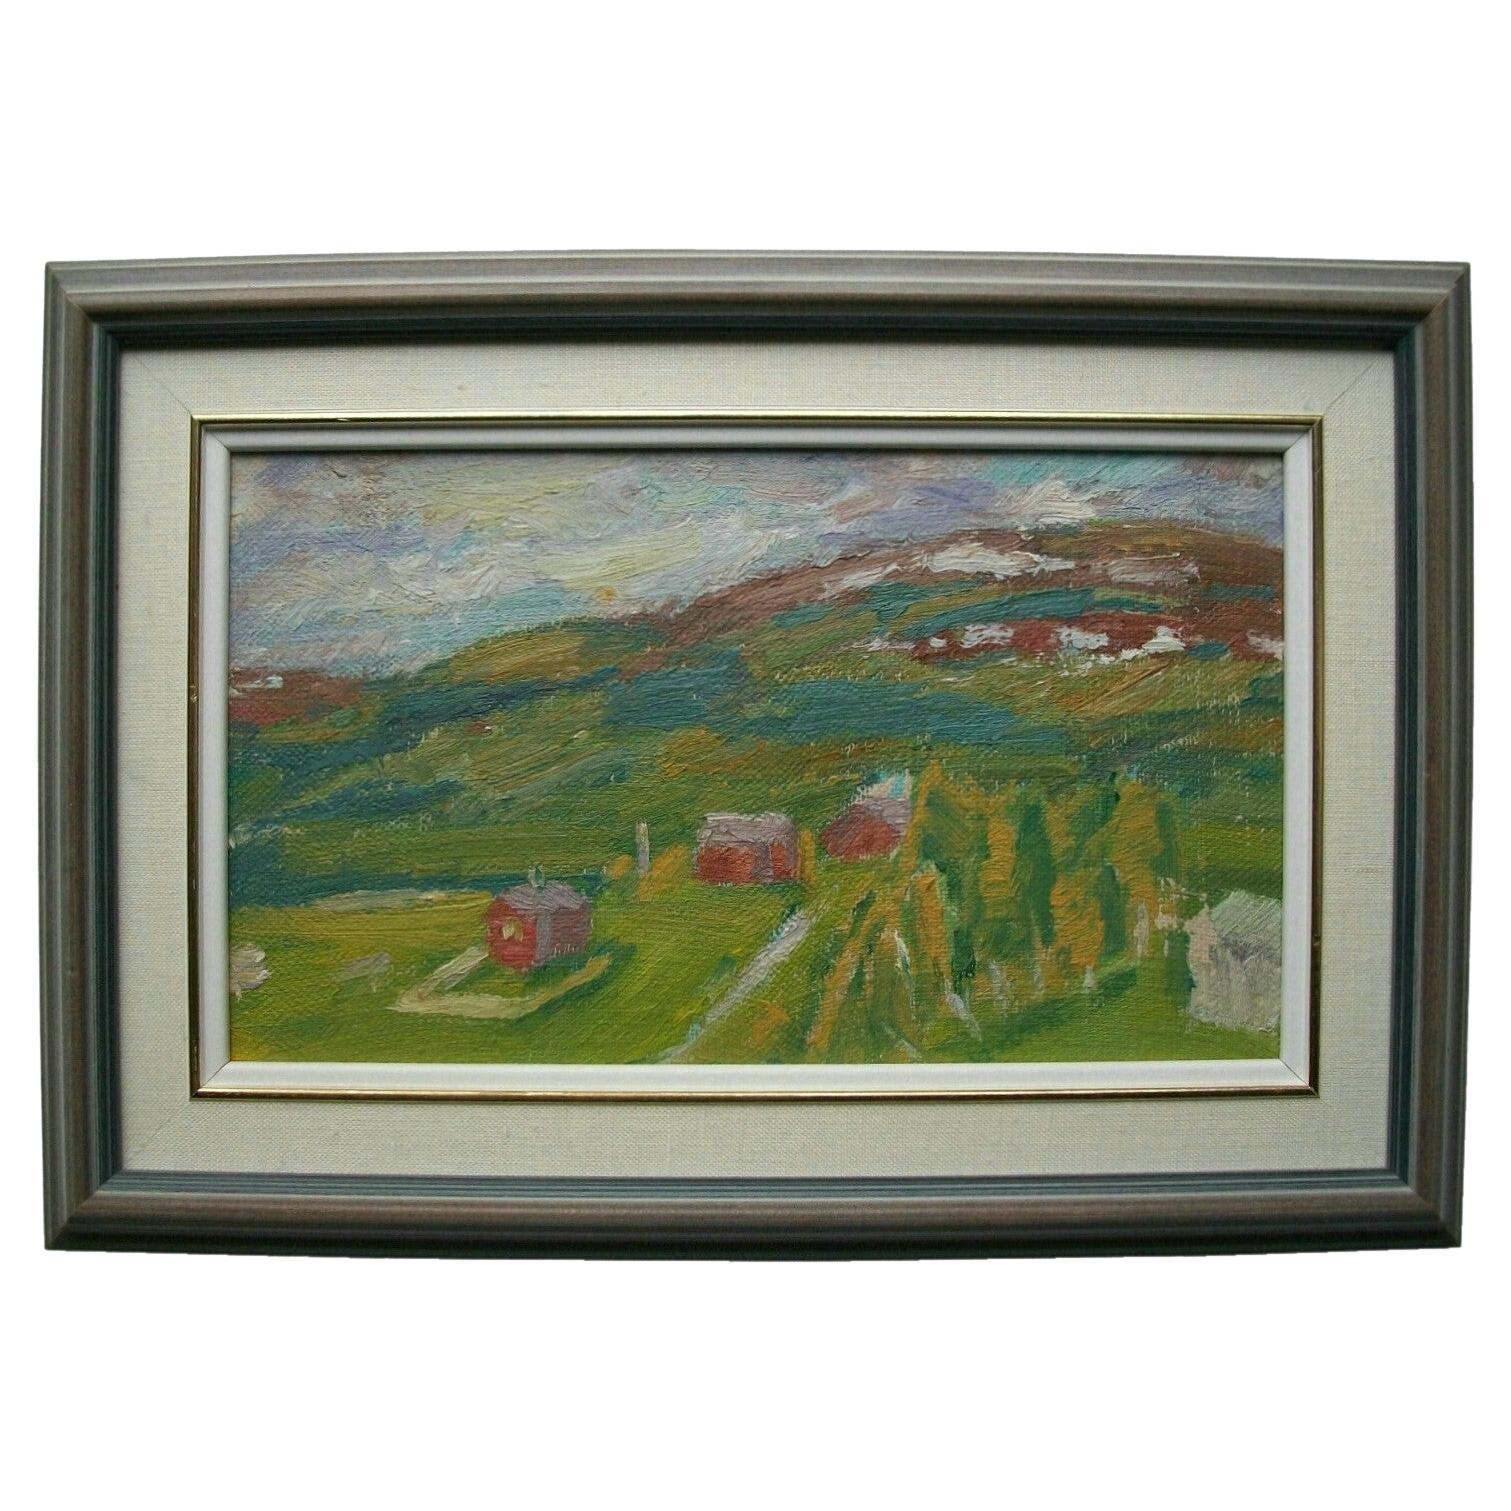 Vintage Impressionist Oil Painting - Unsigned - Framed - Canada - Mid 20th C.